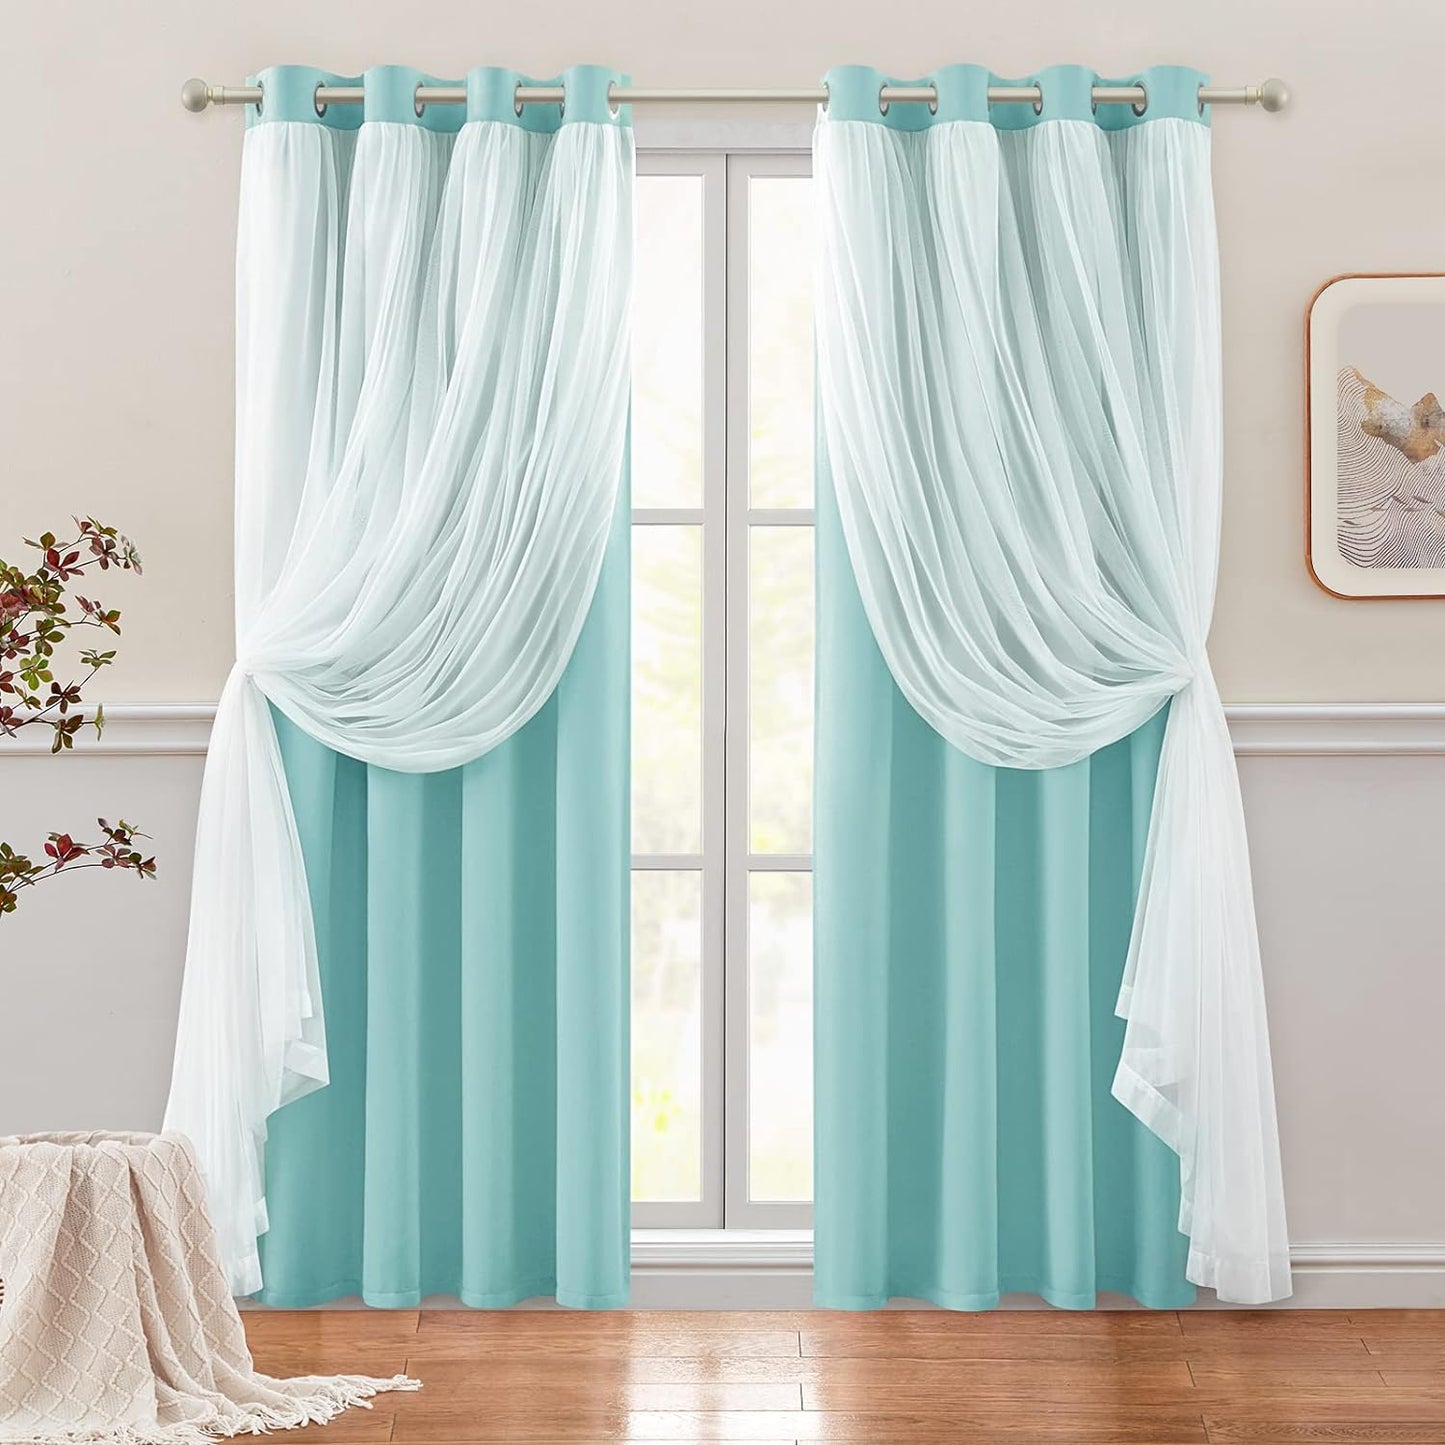 HOMEIDEAS Double Layer Curtains Light Grey Blackout Curtains 84 Inch Length 2 Panels Nursery Curtains for Girls Kids Bedroom Grommet Blackout Curtains with Sheer Overlay  HOMEIDEAS Aqua-1 52" X 84" 